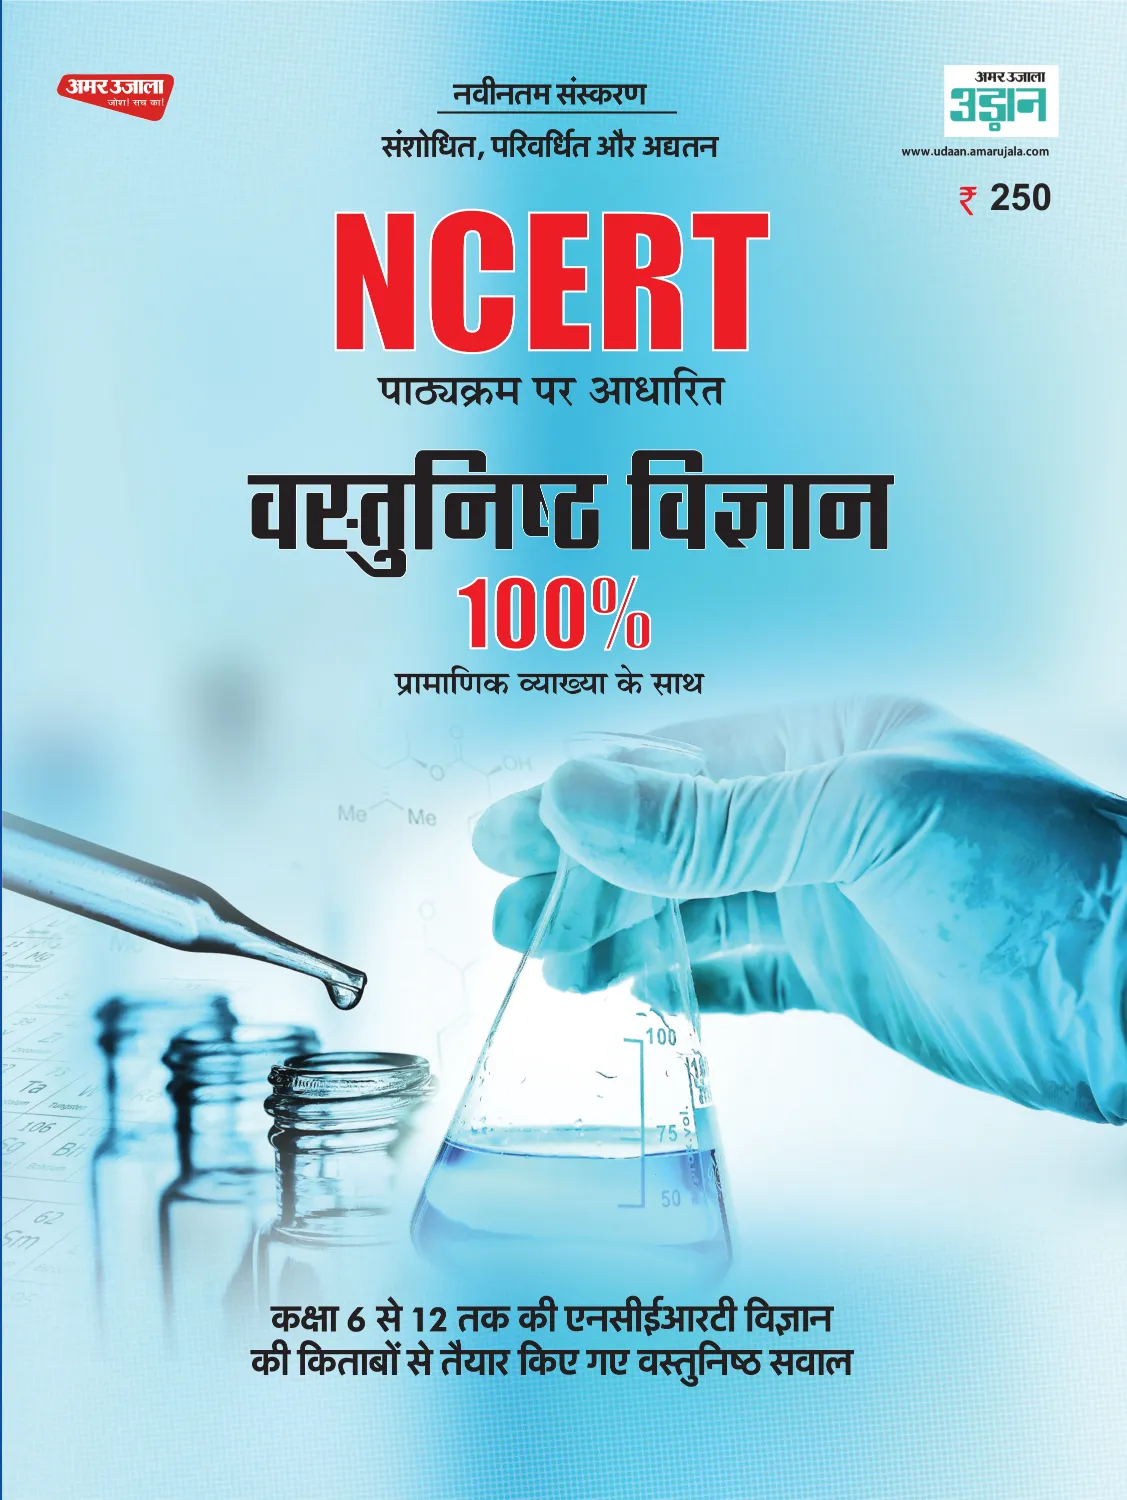 NCERT Objective Science (Print Book)